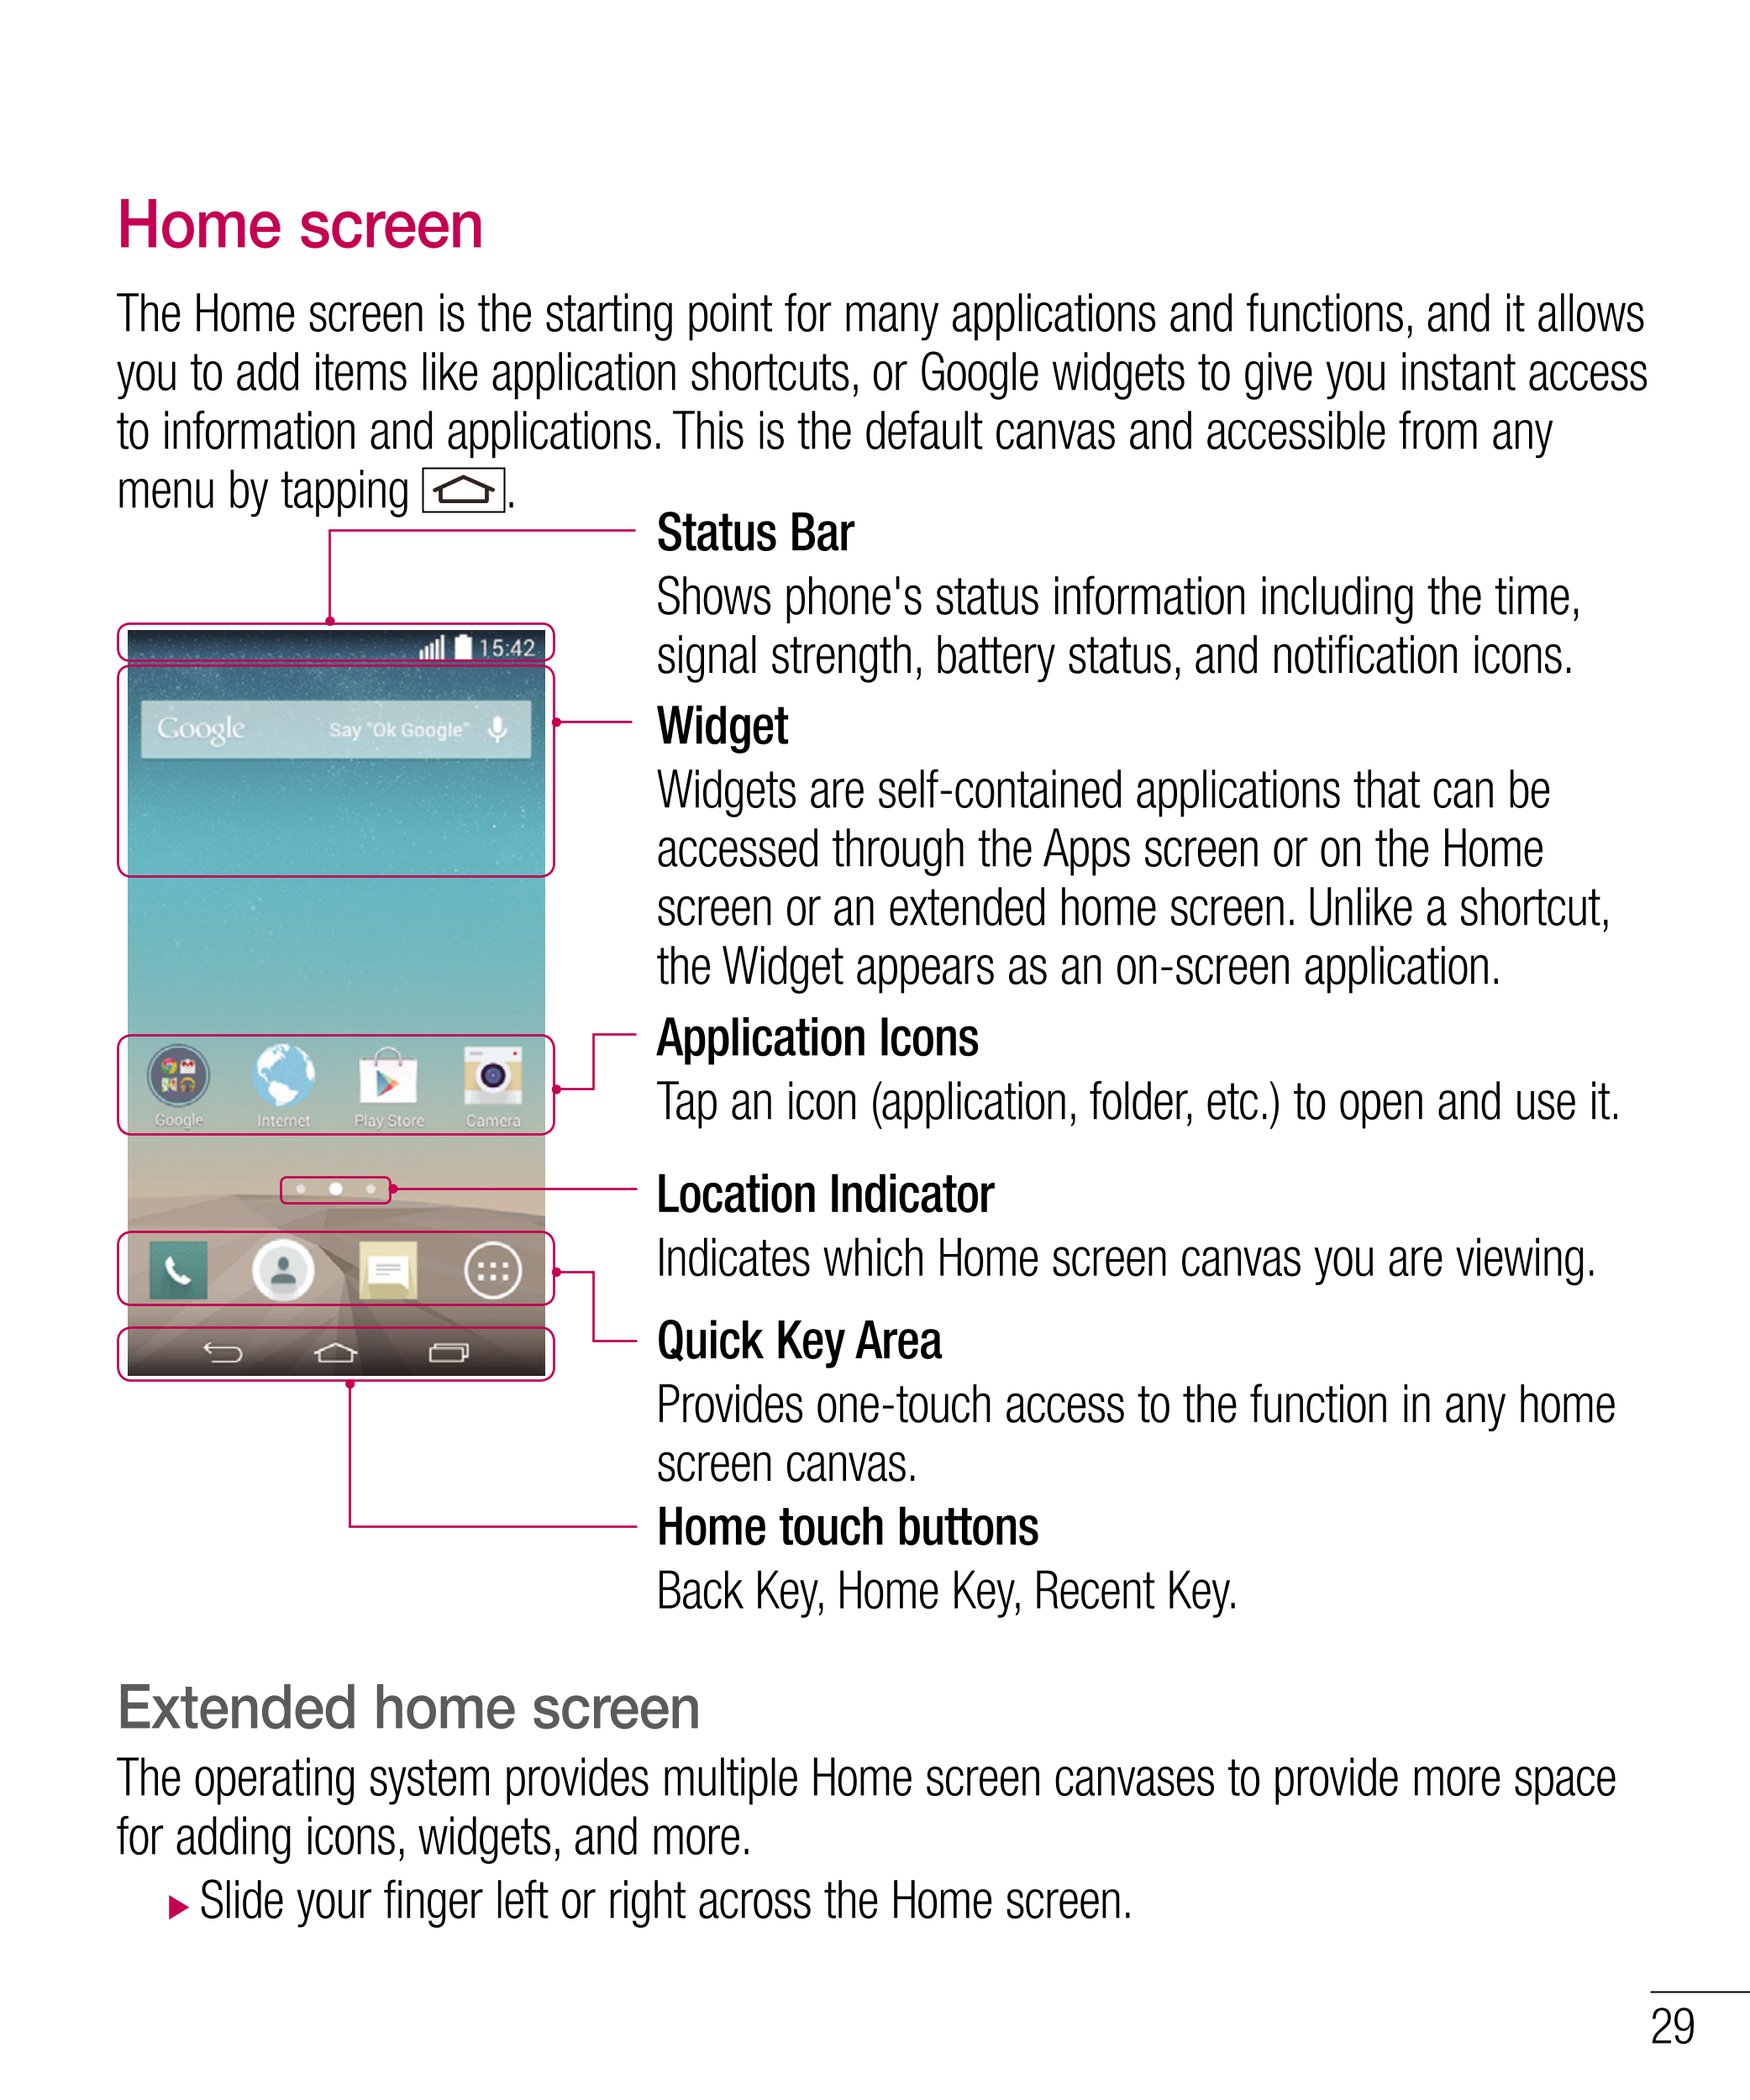 Home screen
The Home screen is the starting point for many applications and functions, and it allows 
you to add items like appl